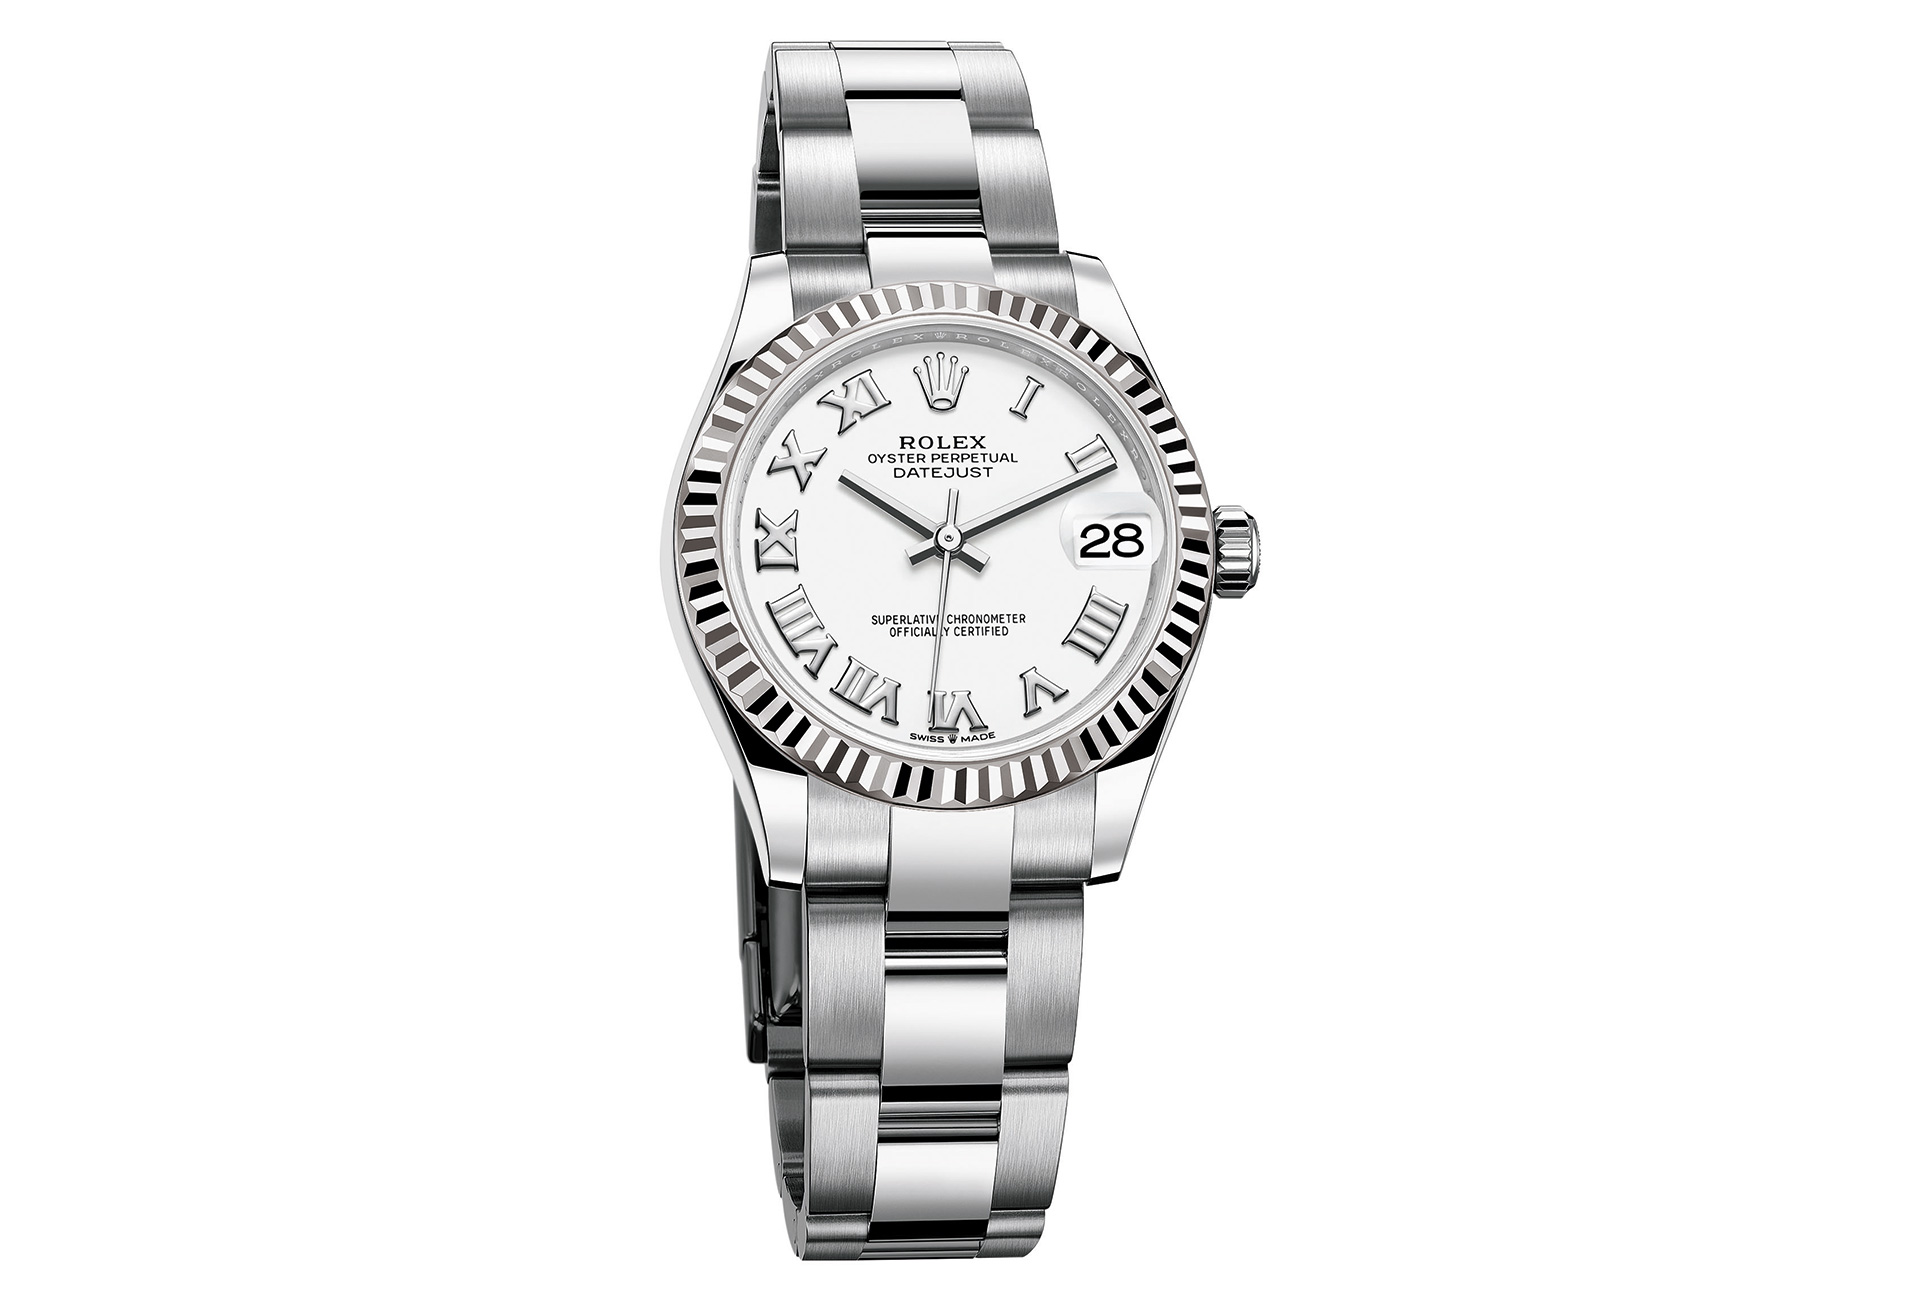 New Rolex Datejust 31 in Rolesor – FHH 